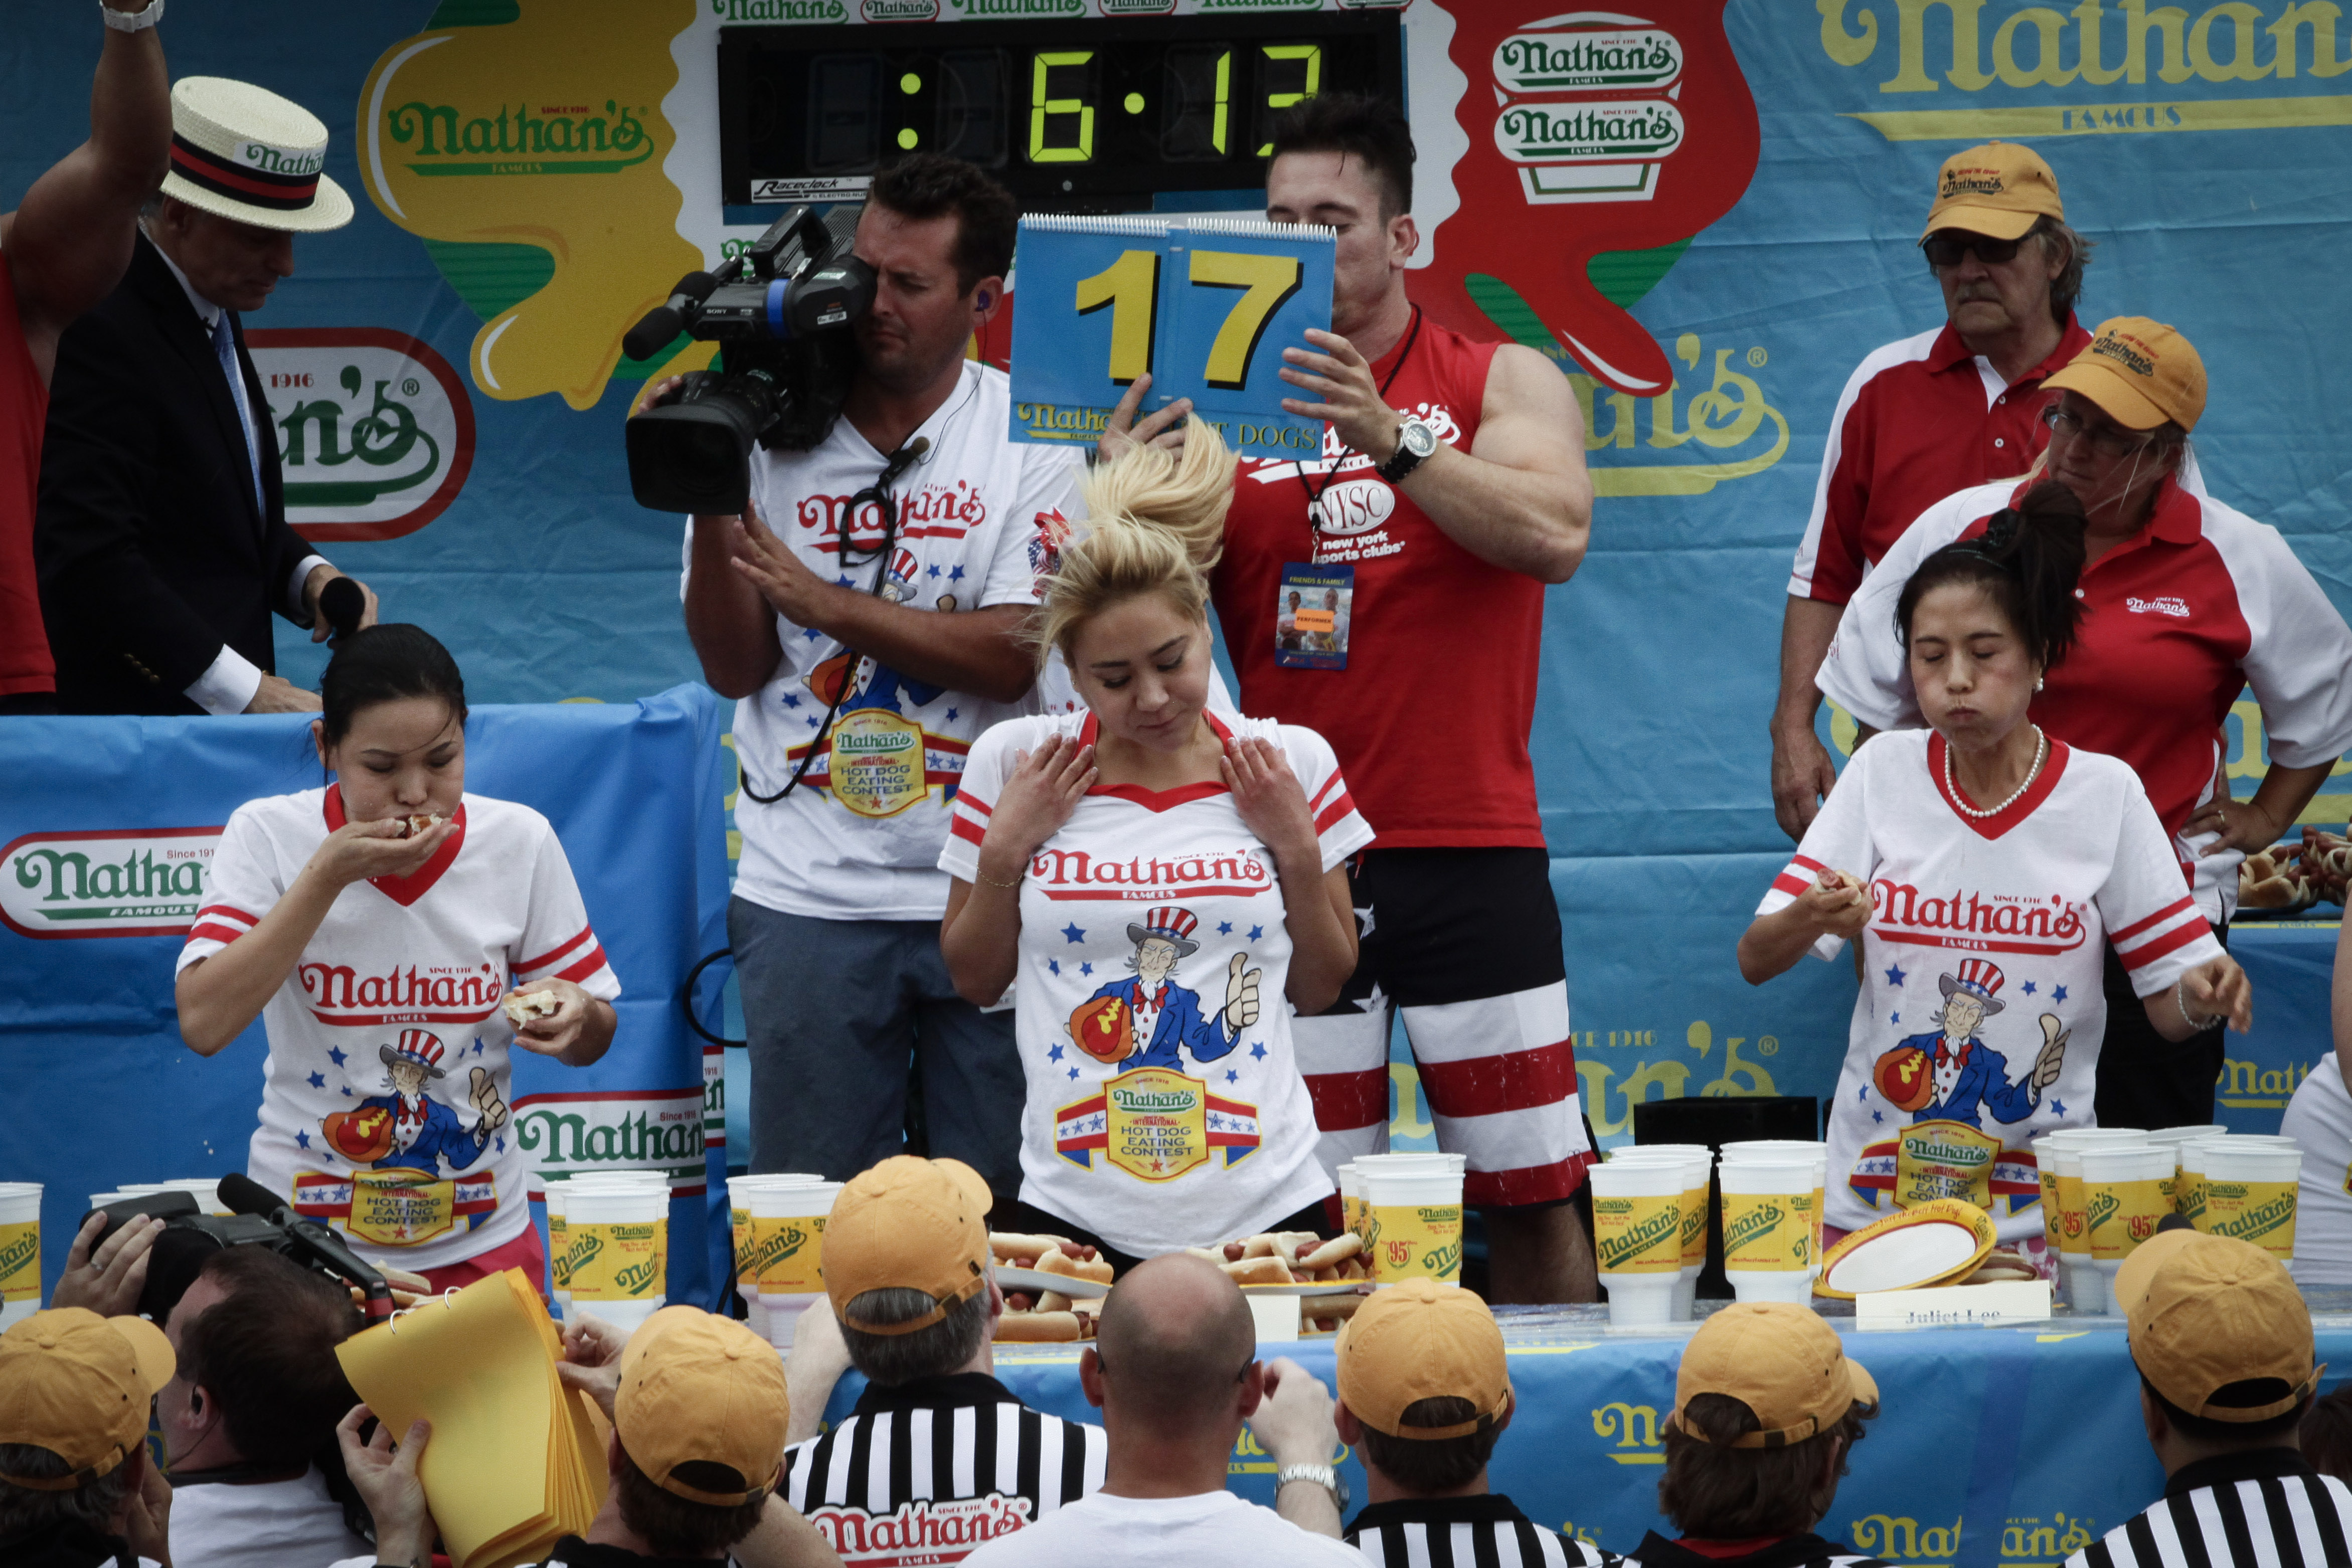 Who Won the Nathan’s Hot Dog Eating Contest?